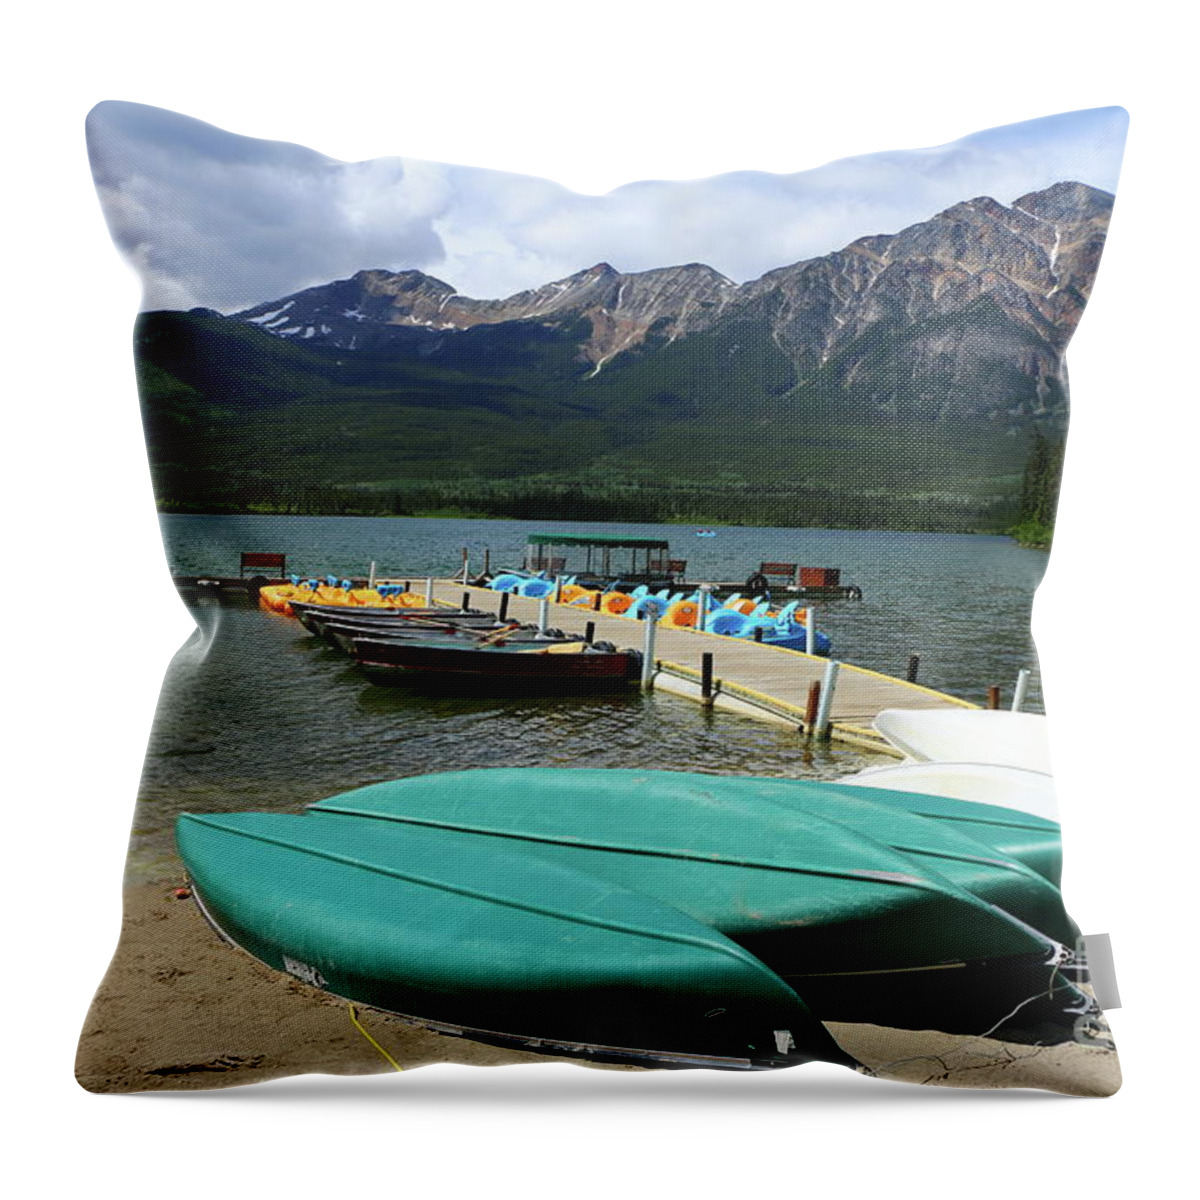 Canada Throw Pillow featuring the photograph Canoes At Pyramid Lake by Christiane Schulze Art And Photography